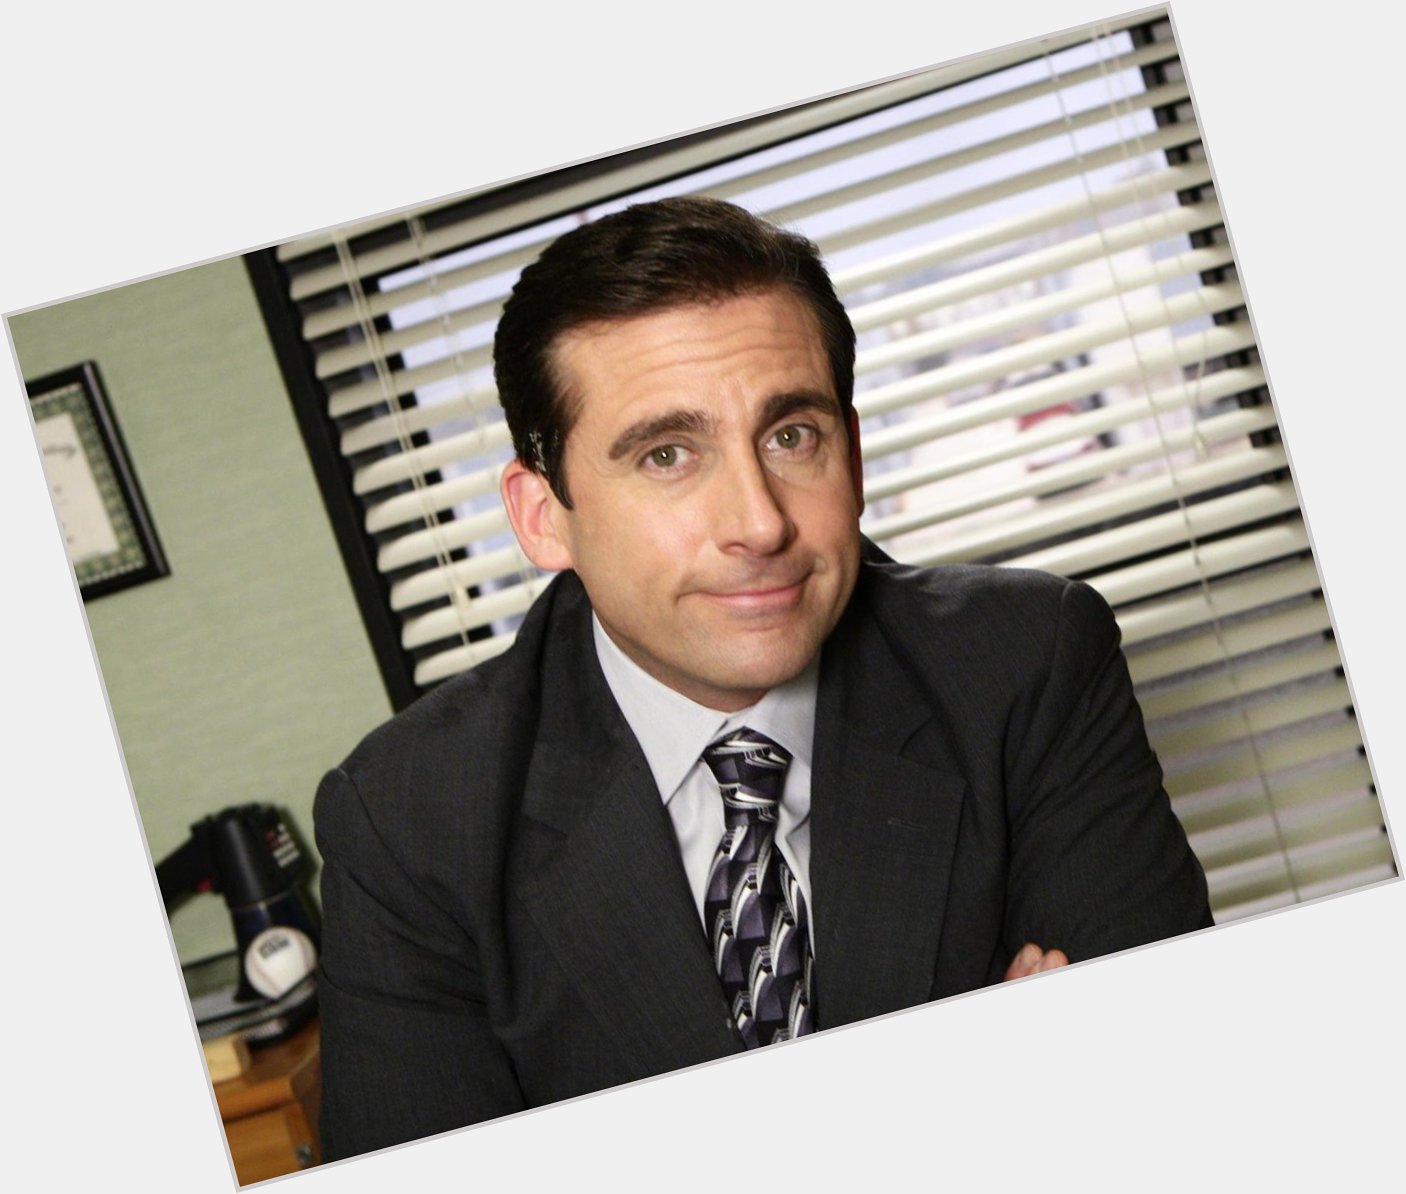 Happy Birthday to Steve Carell who turns 58 today! 